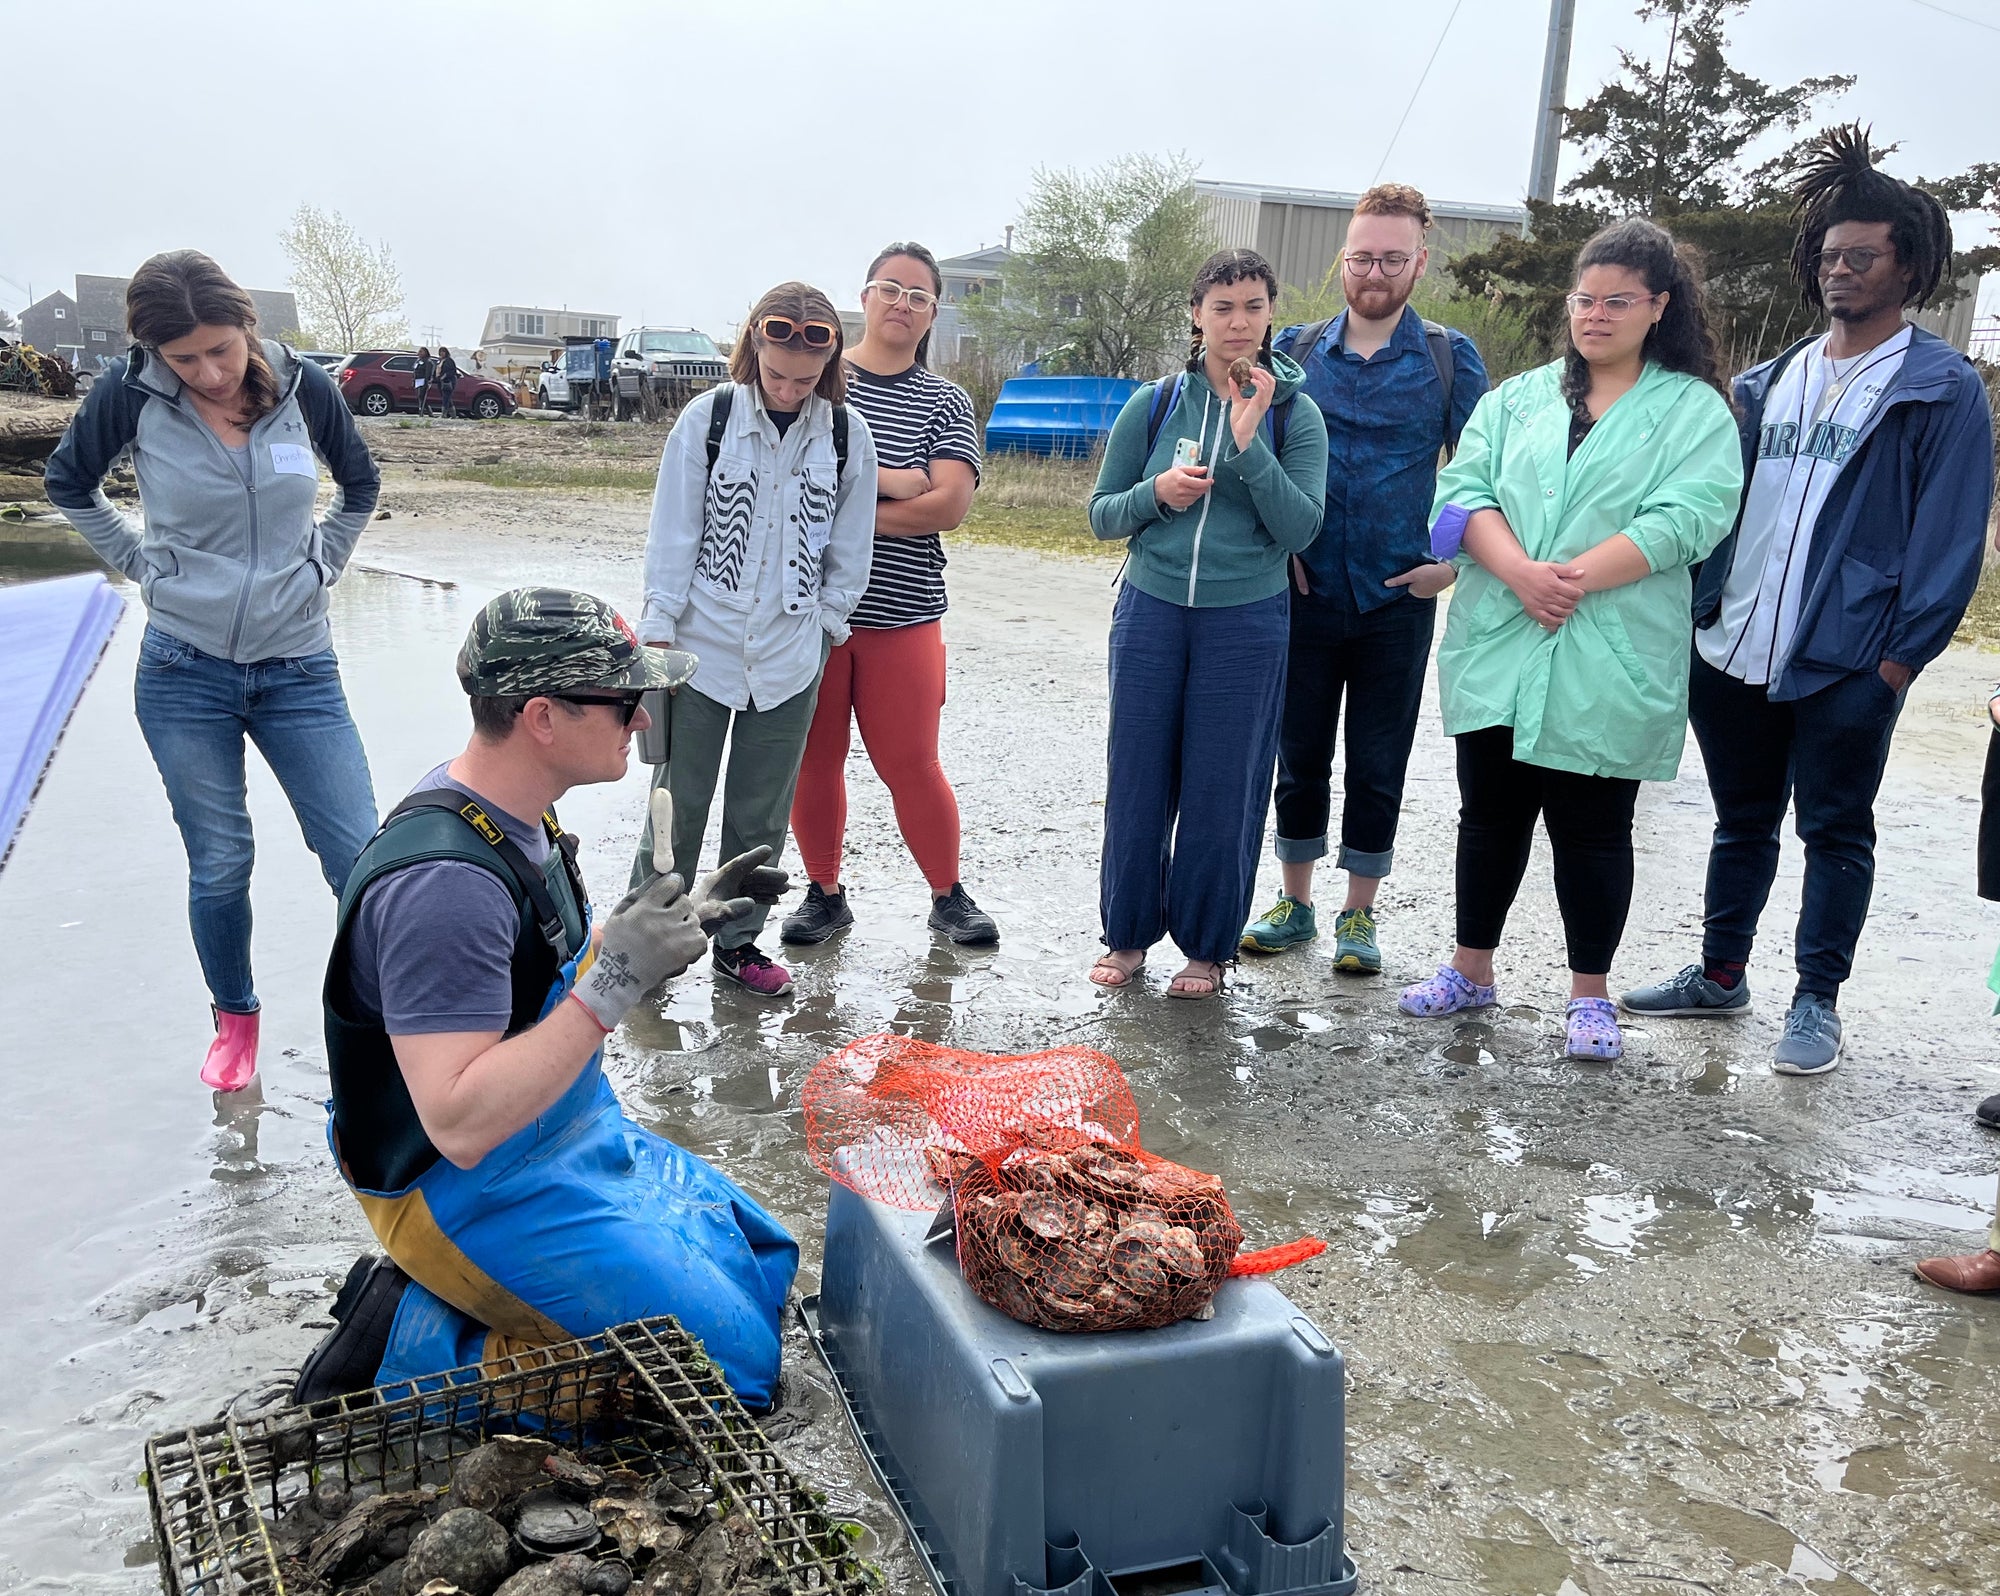 Fishadelphia dock trip participants learn about oyster farming from the Barnegat Oyster Collective